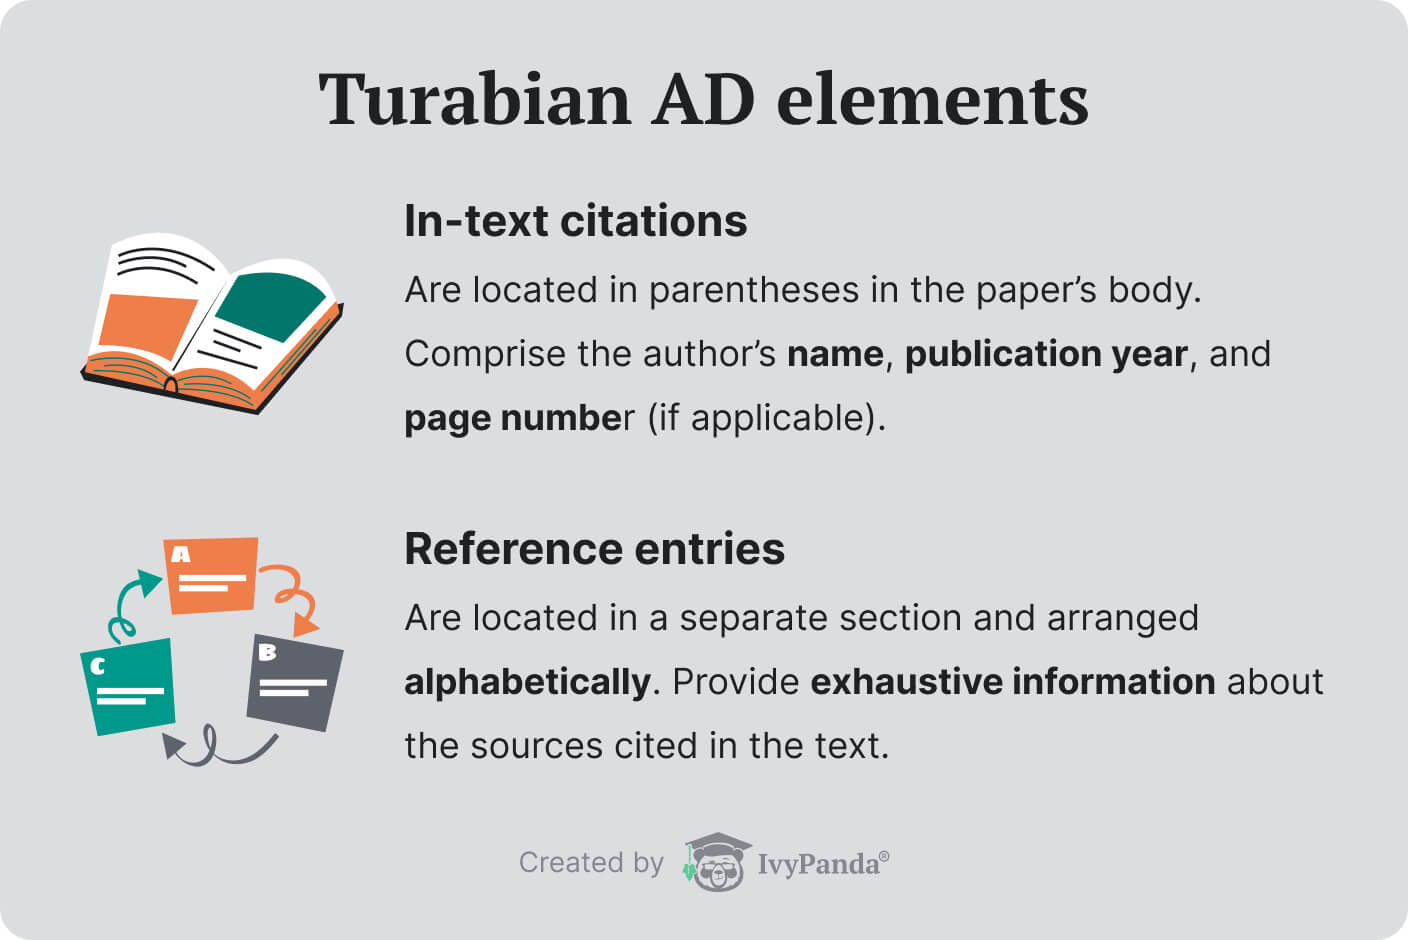 The picture lists the elements of the Turabian notes and bibliography method.